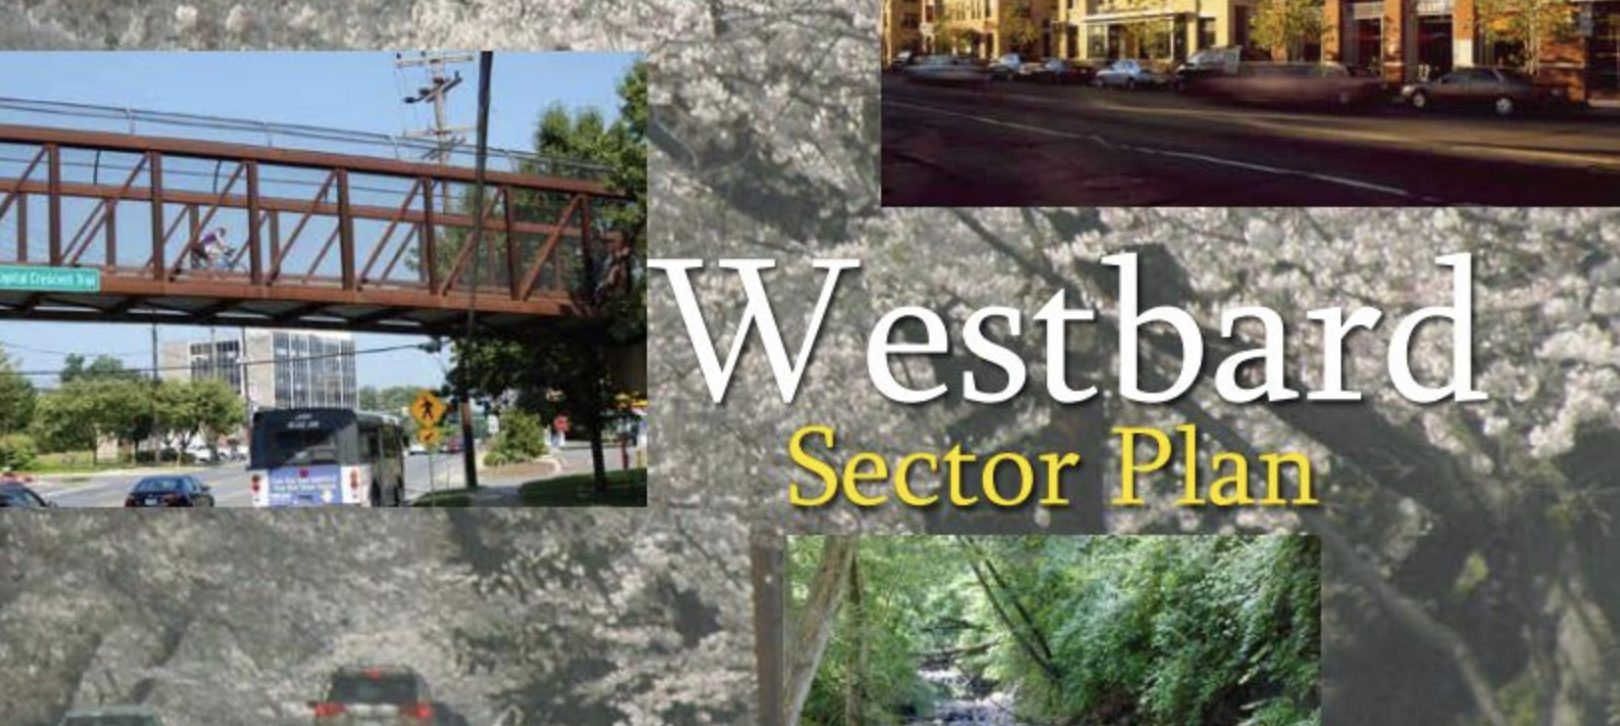 Westbard sector plan with images from the cover